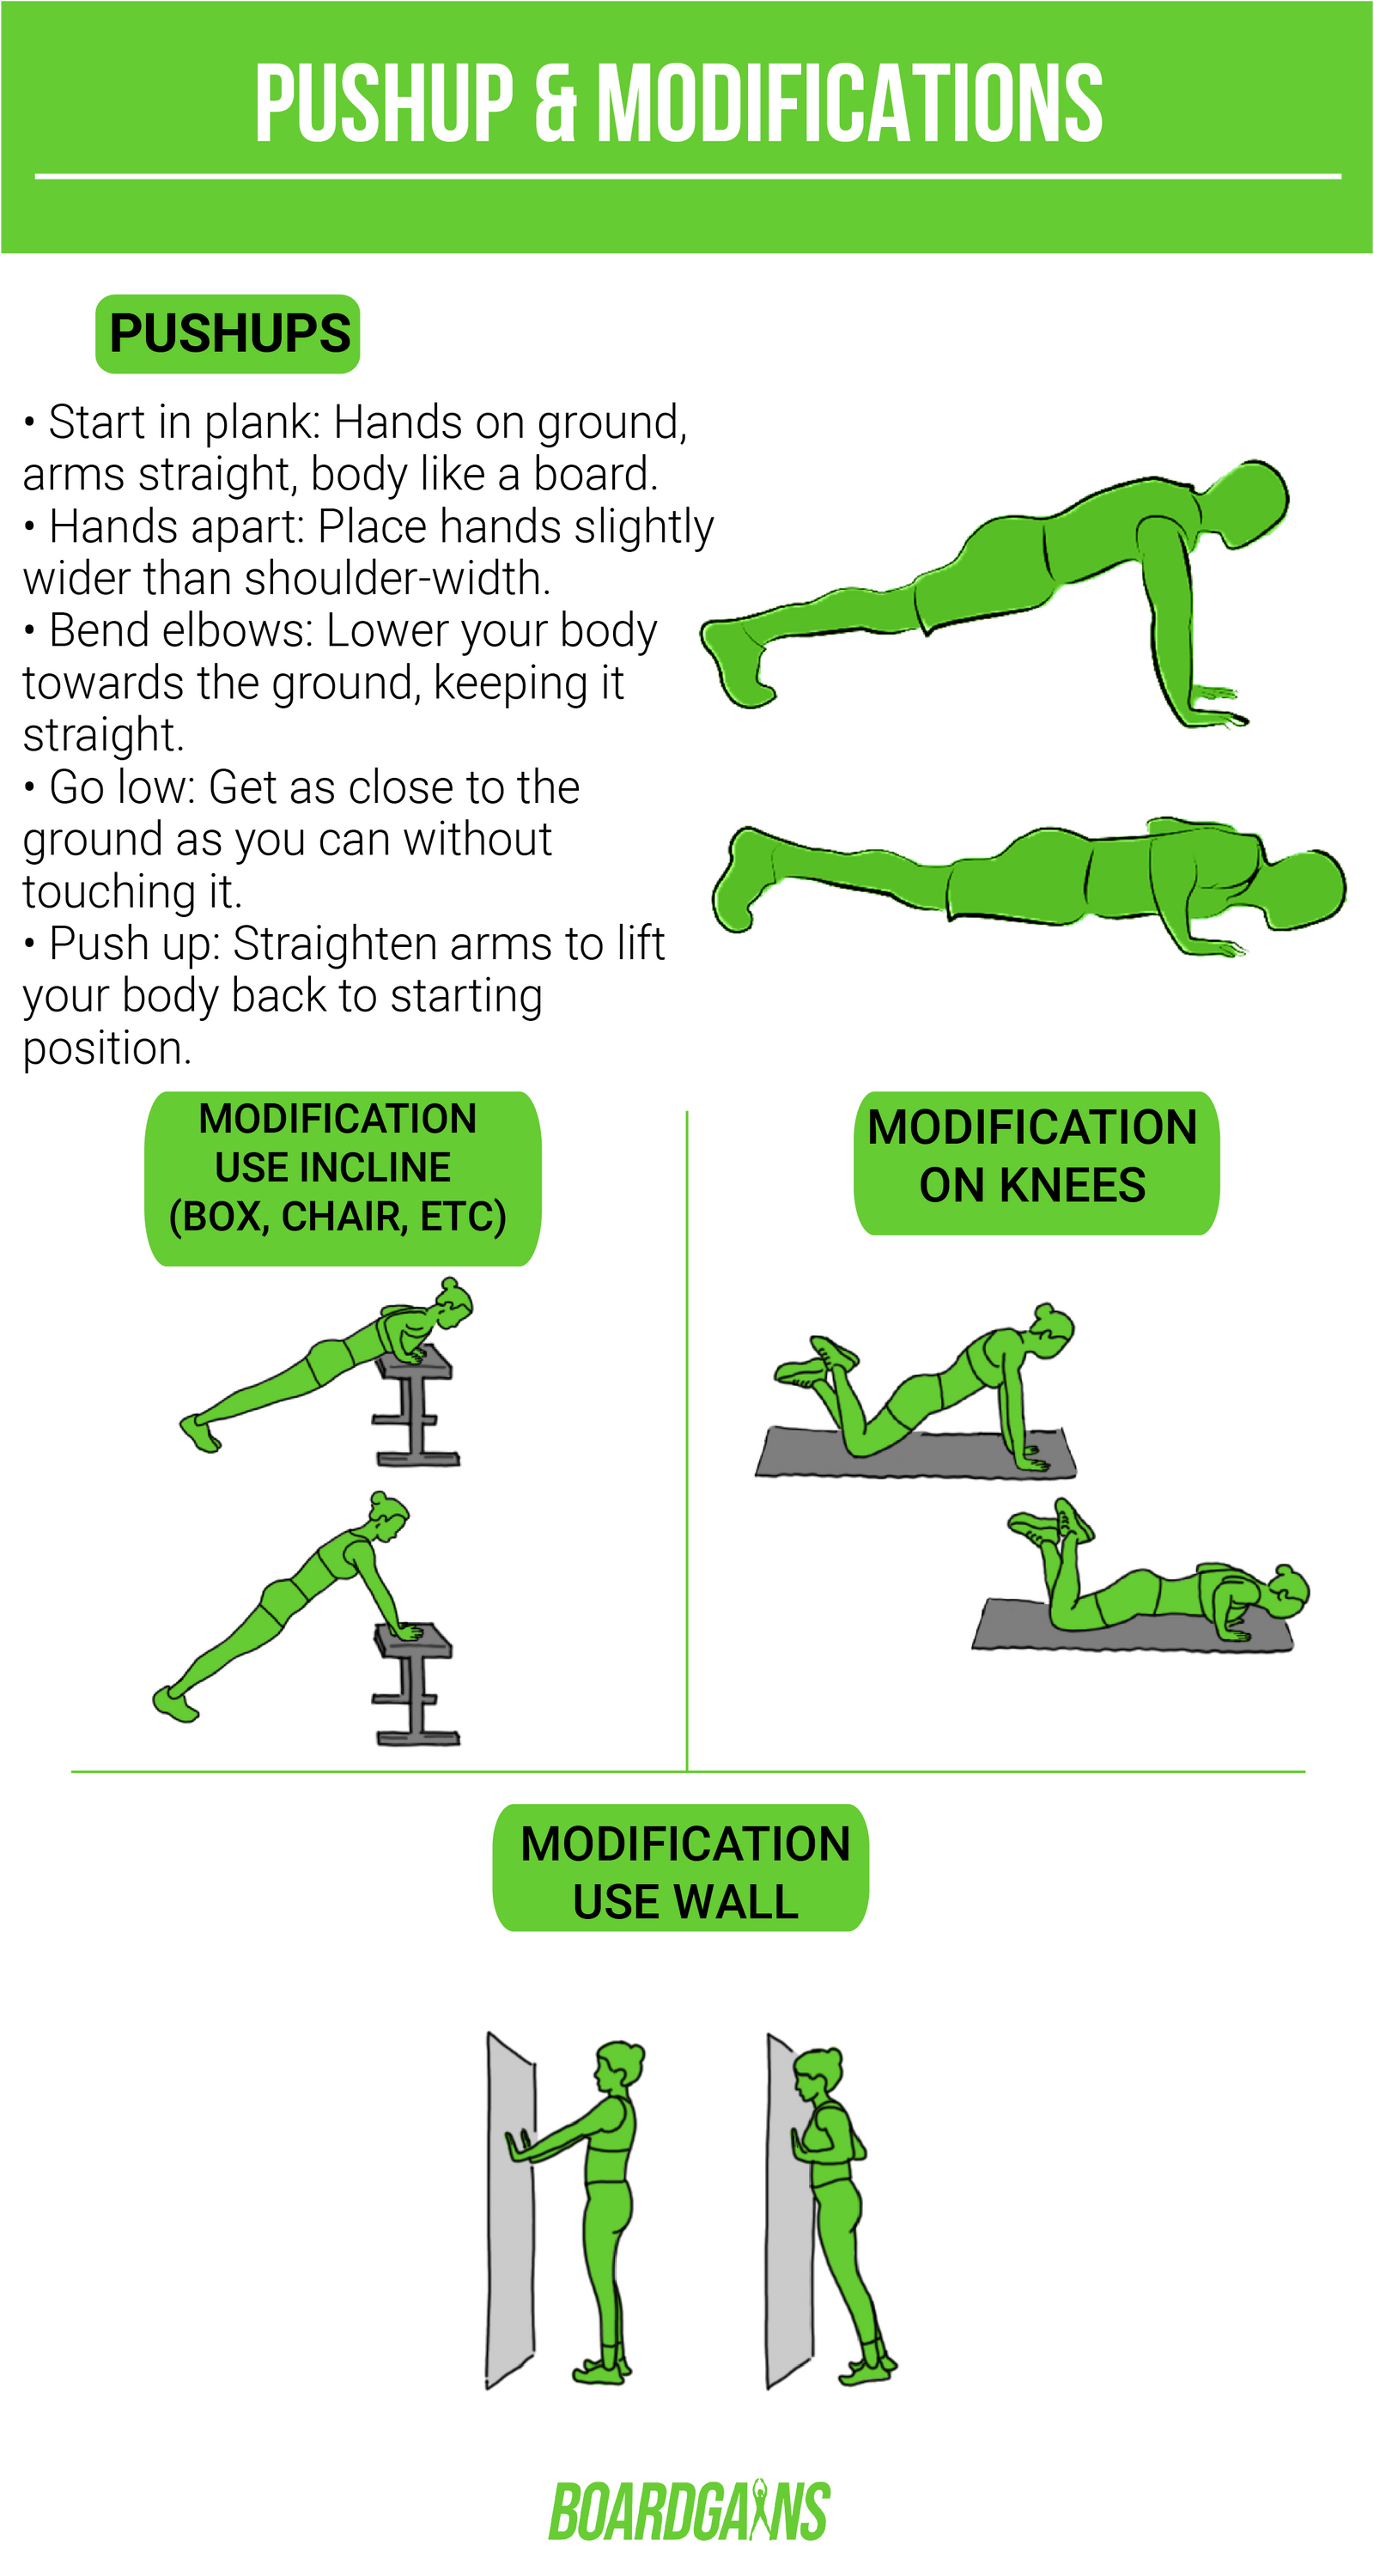 Push-ups: How to Do, Benefits and Common Mistakes to Avoid